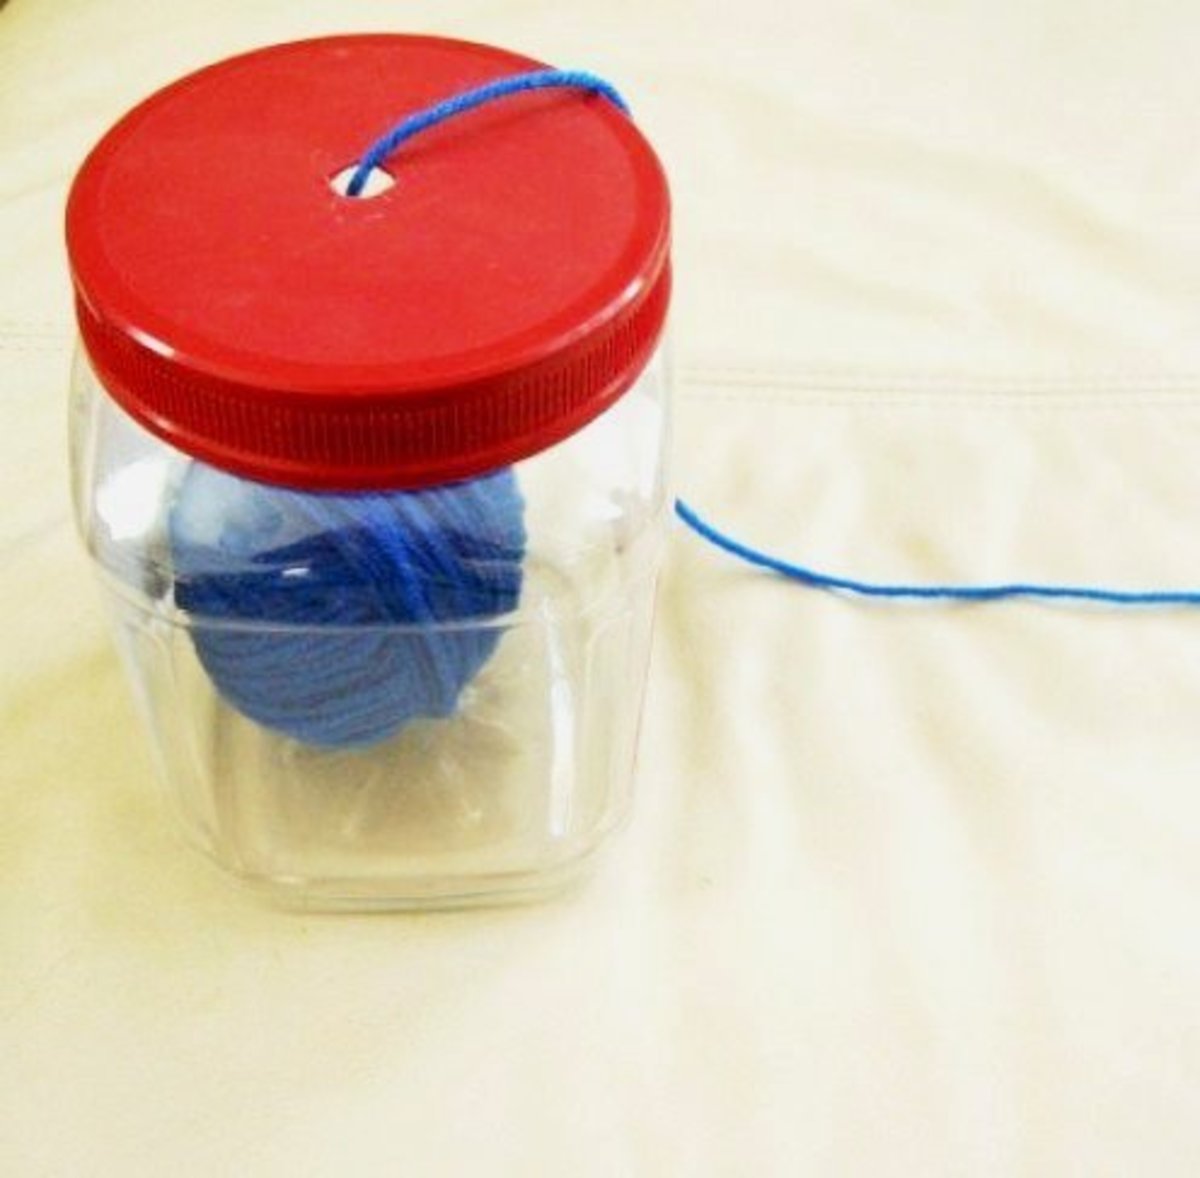 A functional yarn holder is as near as a sturdy plastic container.